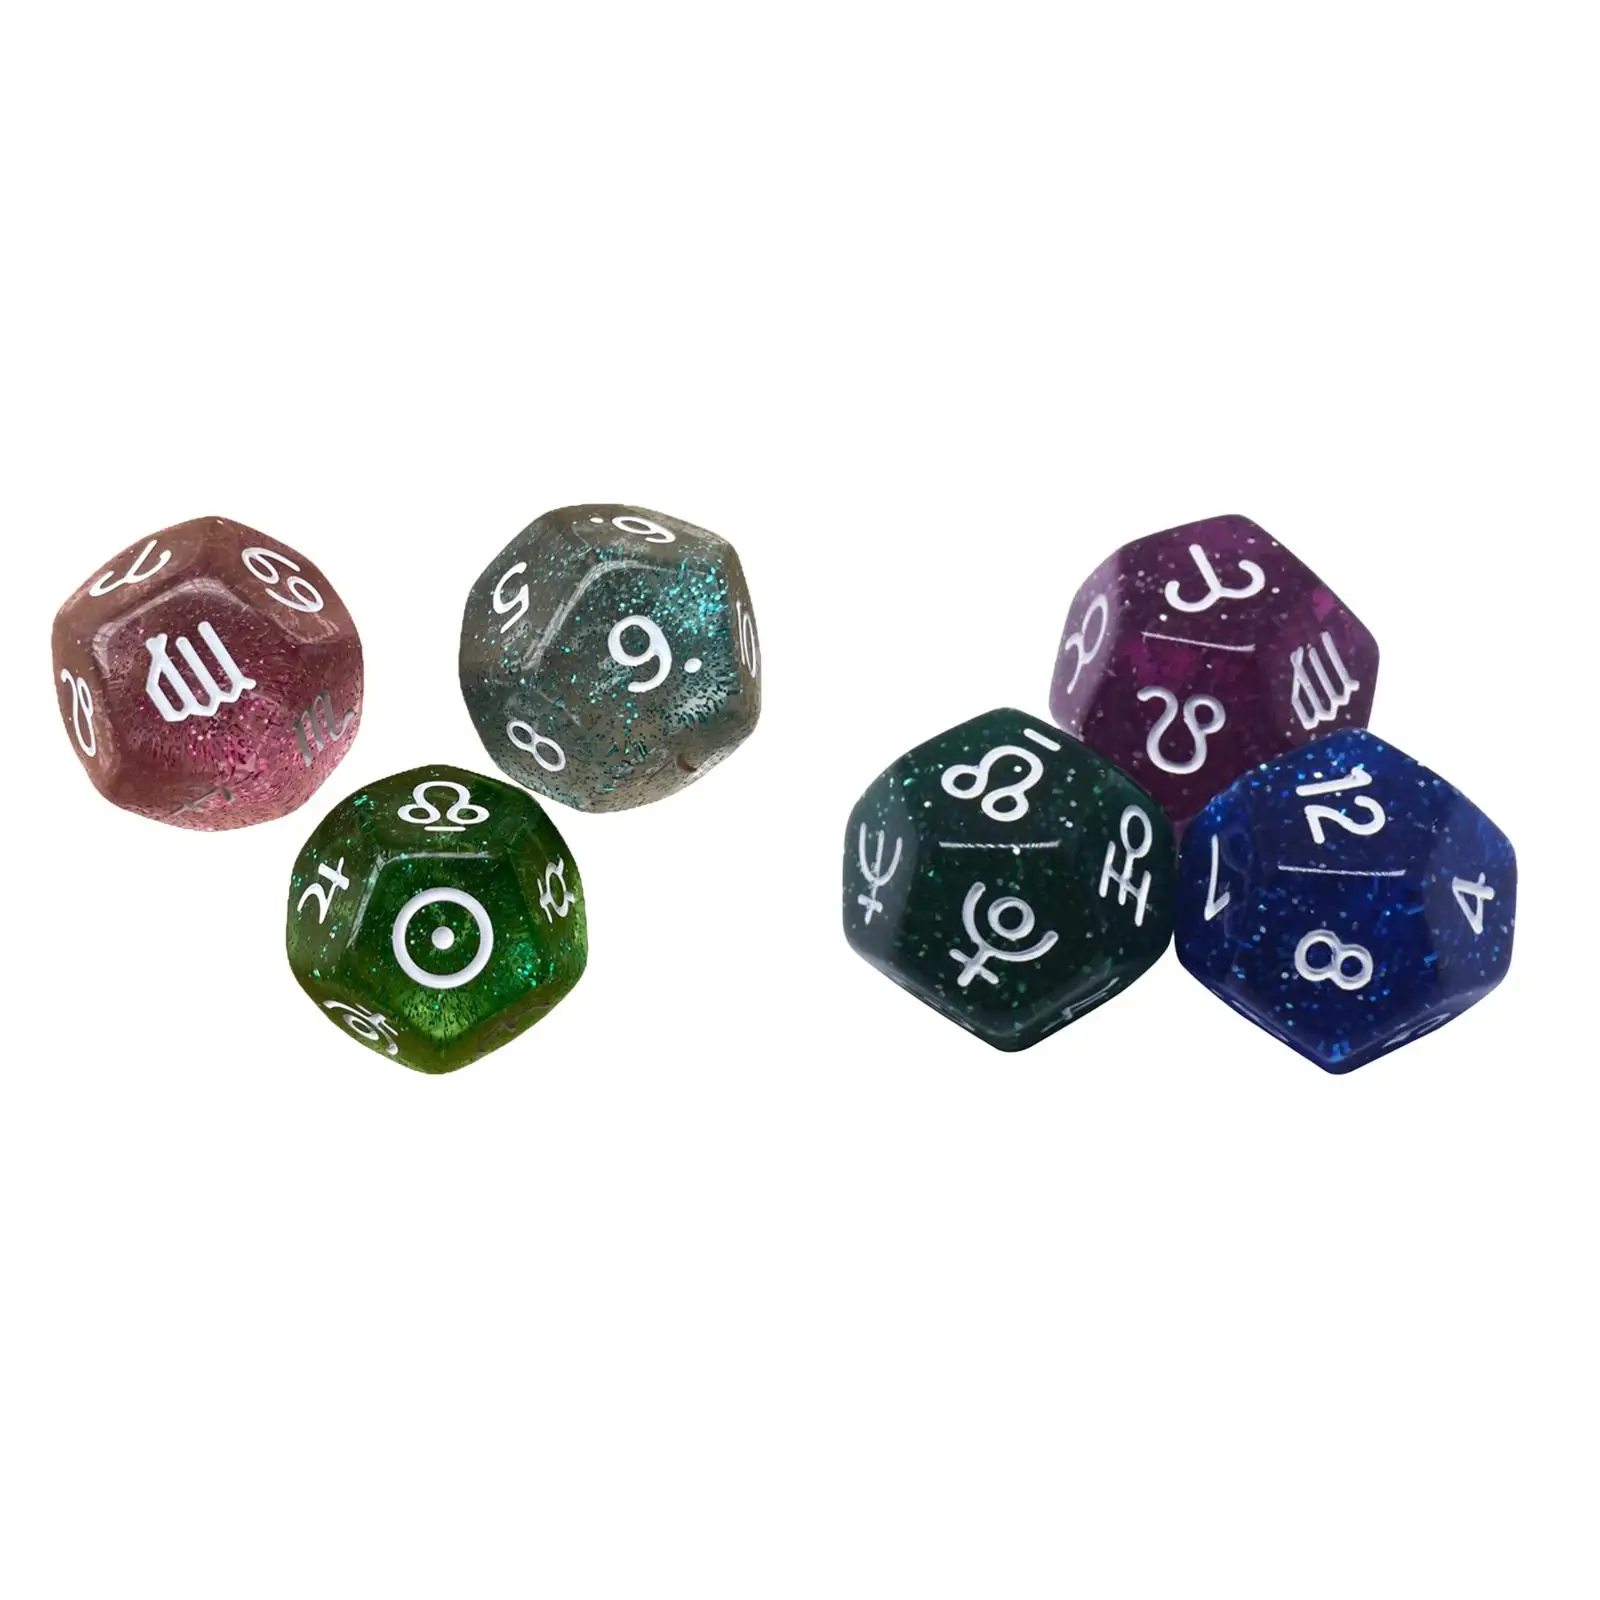 

3 Pieces Constellation Sign Dice Role Playing Game Acrylic 12 Sided Polyhedral Dice for Party Astro Divination Gaming Accessory